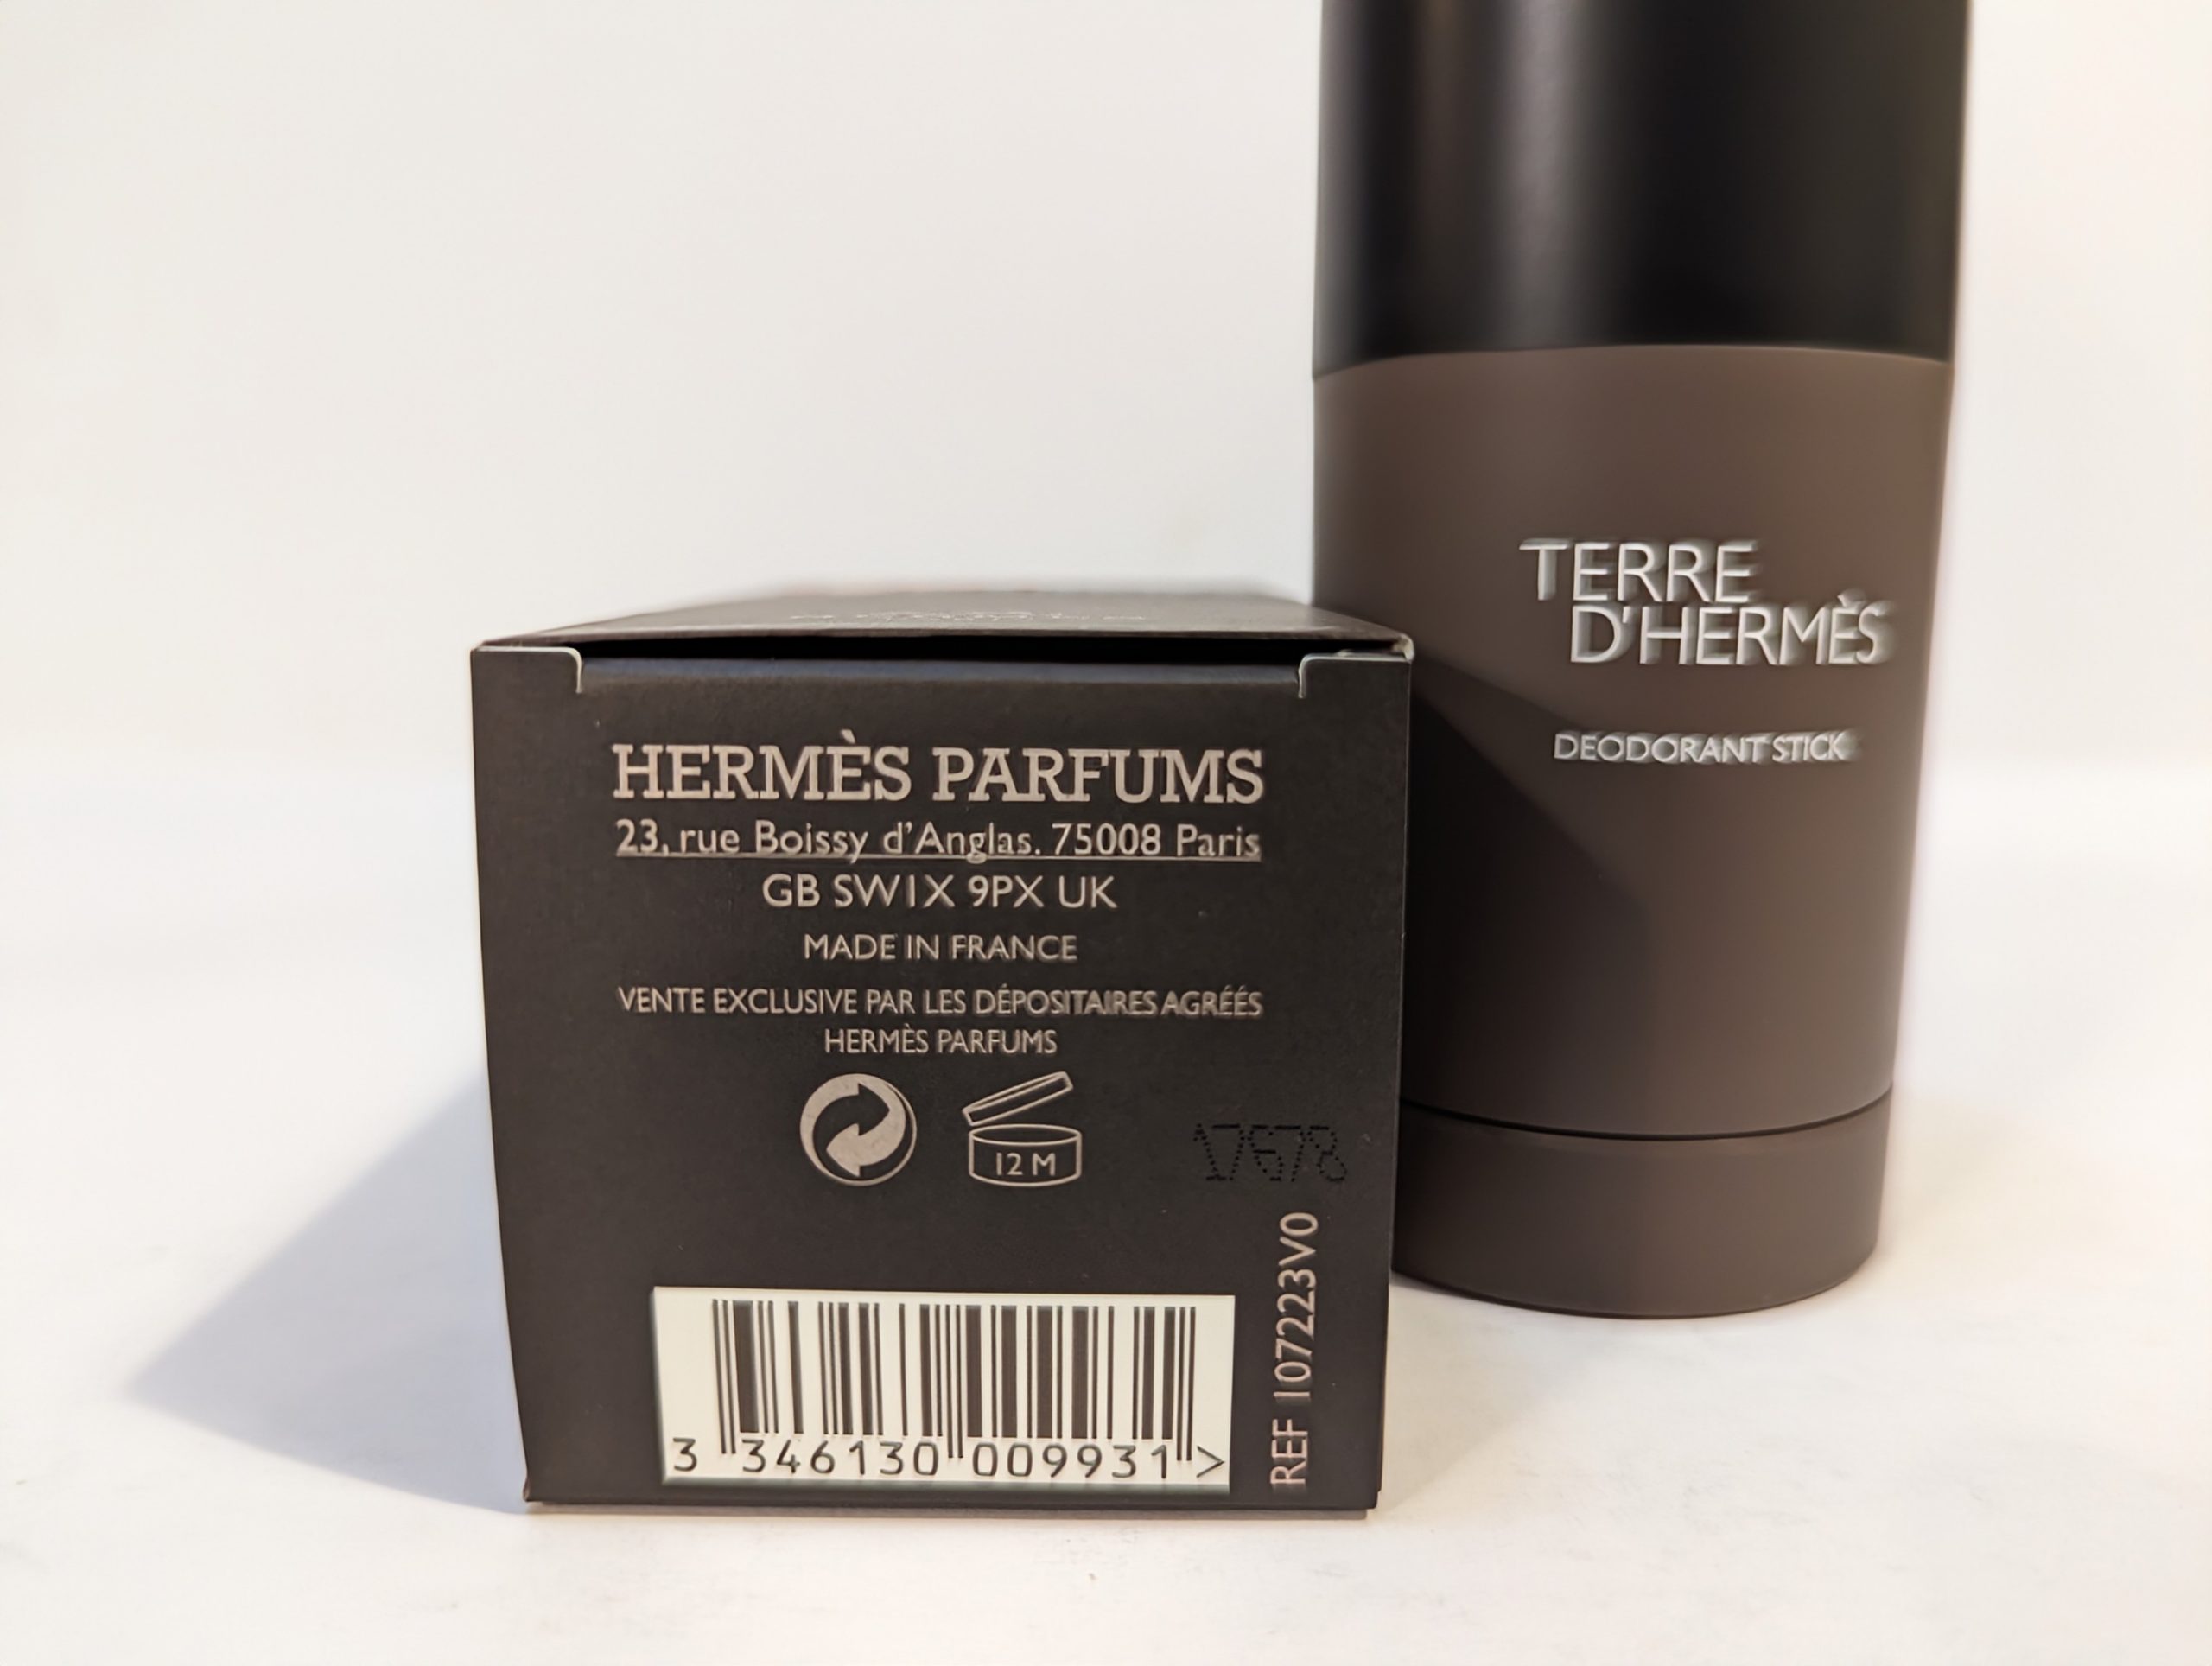 A box labeled “HERMÈS PARFUMS” and a “TERRE D’HERMÈS” deodorant stick are displayed. The packaging includes product details and a barcode.